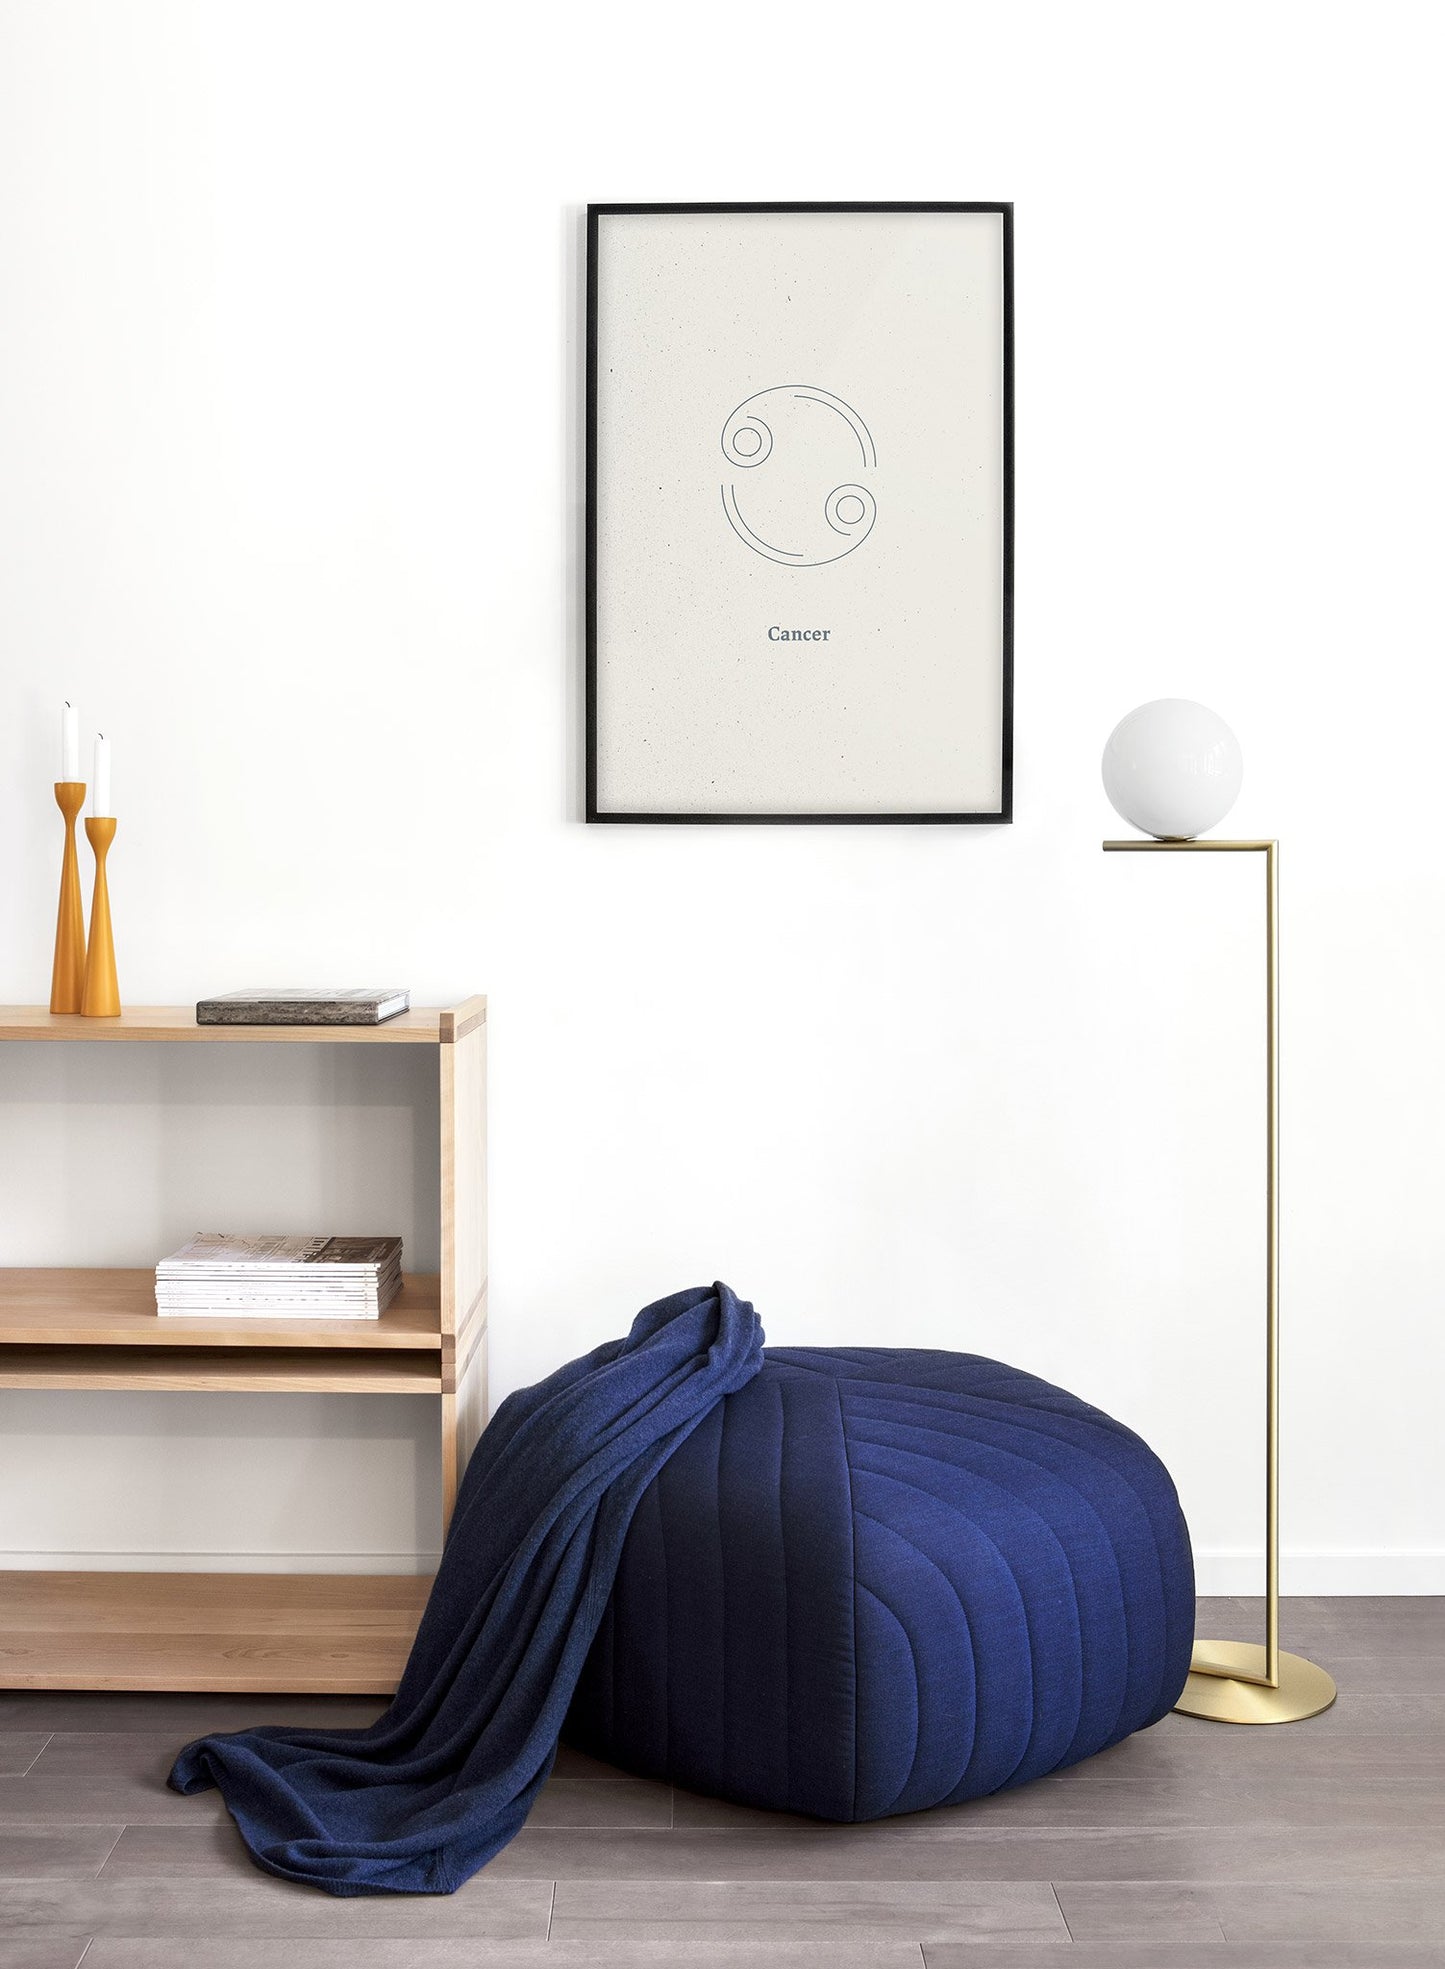 Minimalist celestial illustration poster by Opposite Wall with Cancer symbol - Lifestyle - Living Room